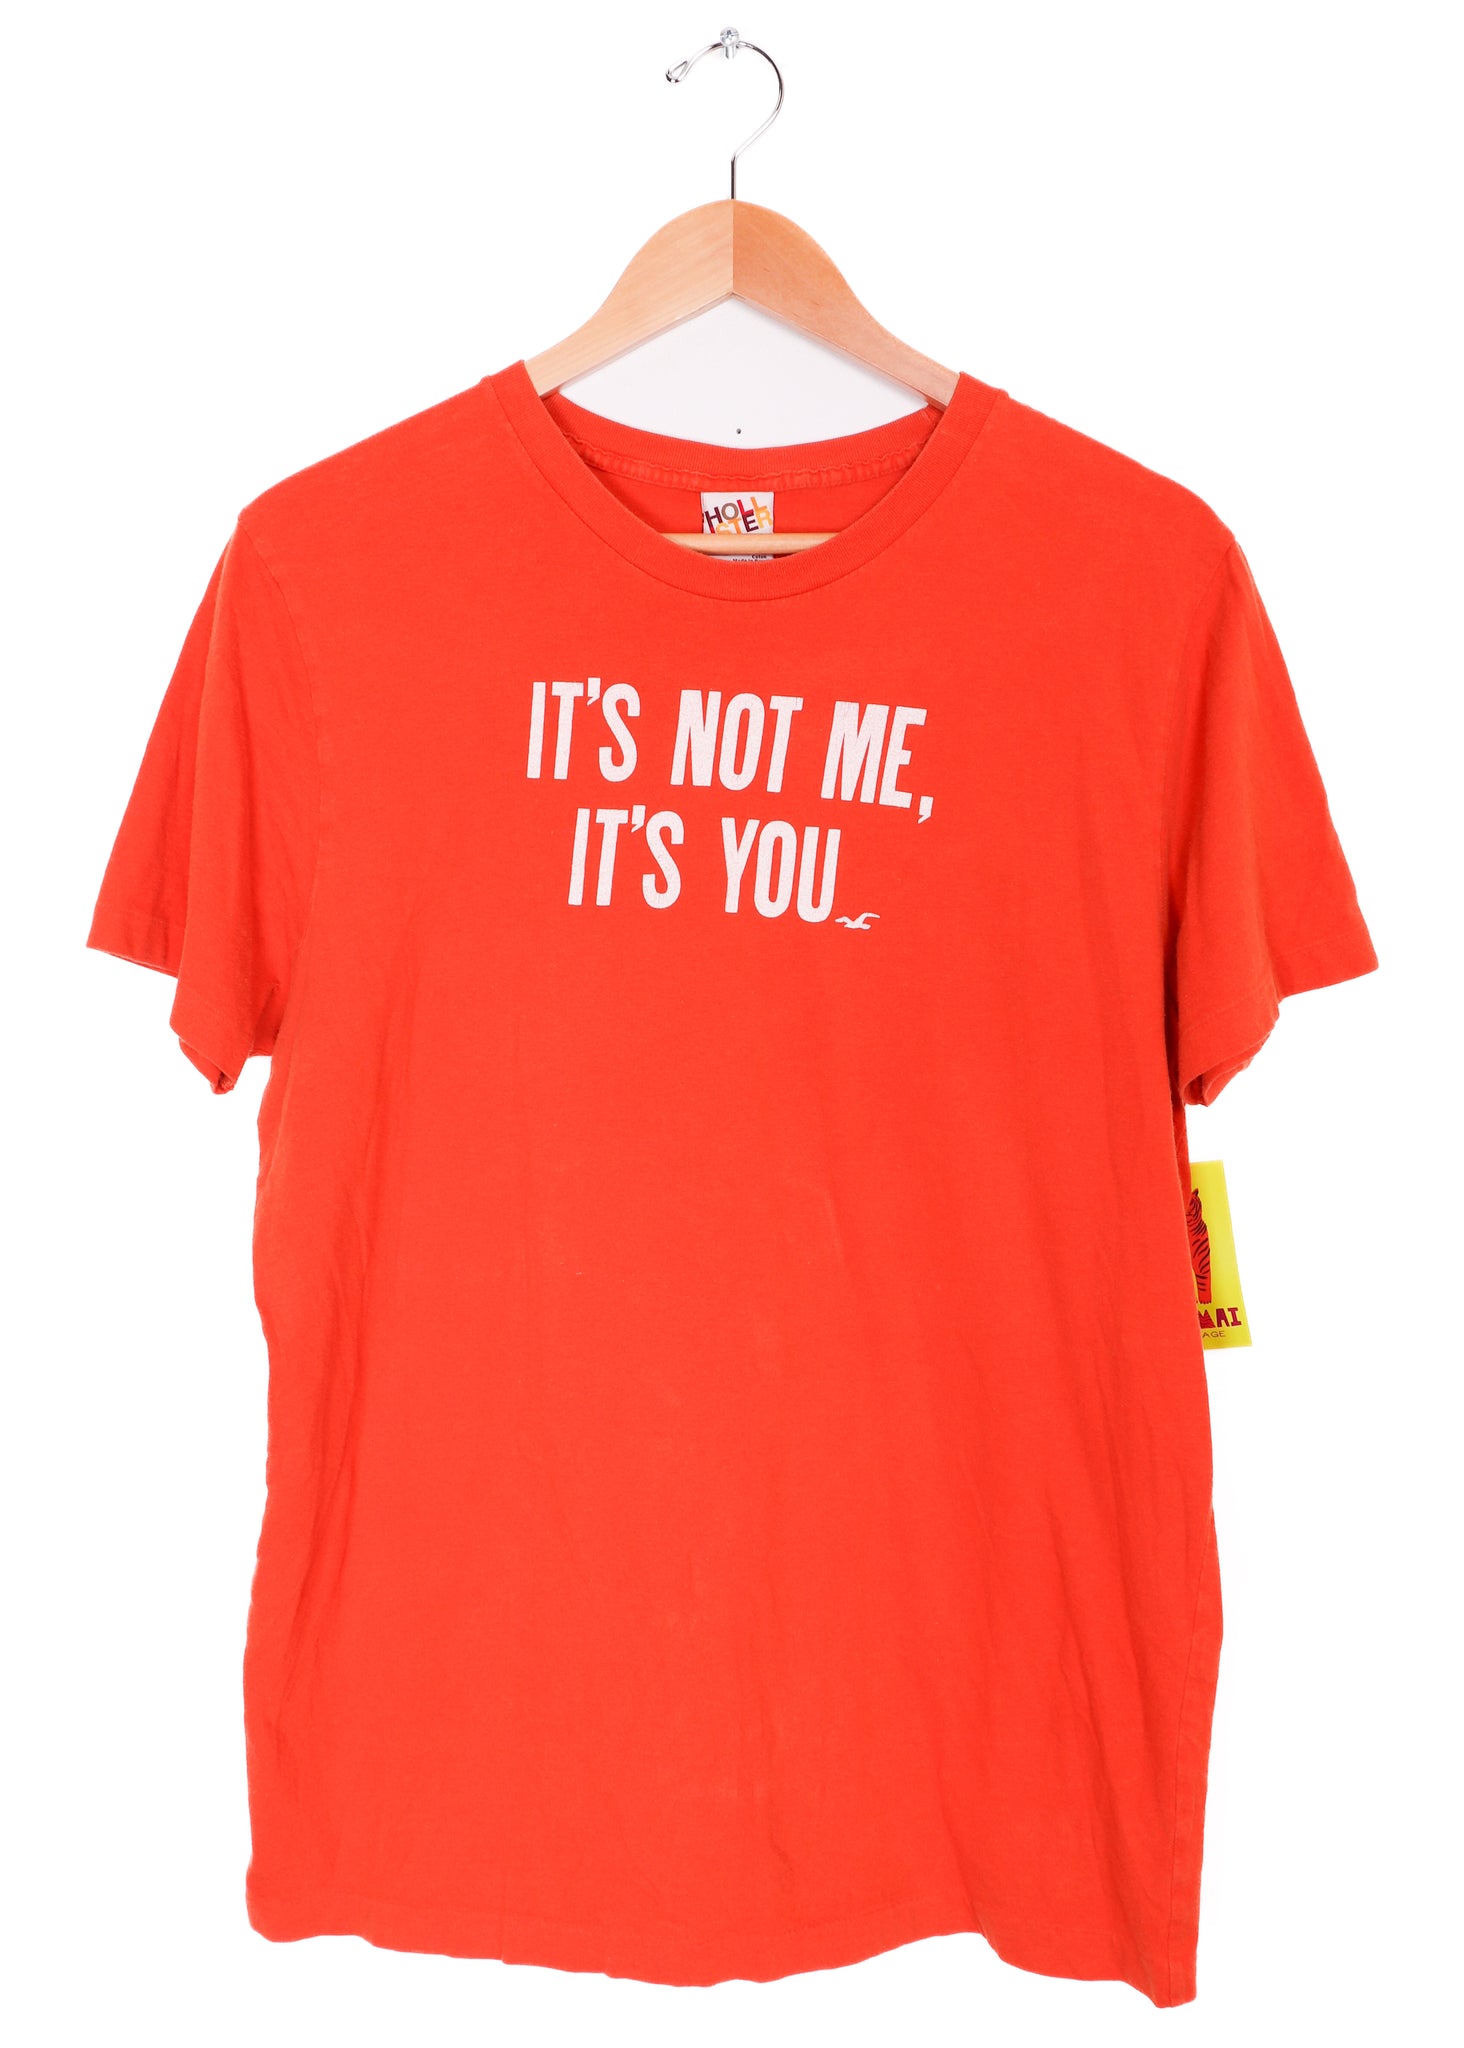 Early 90s Hollister "It's not me it's you" T-Shirt